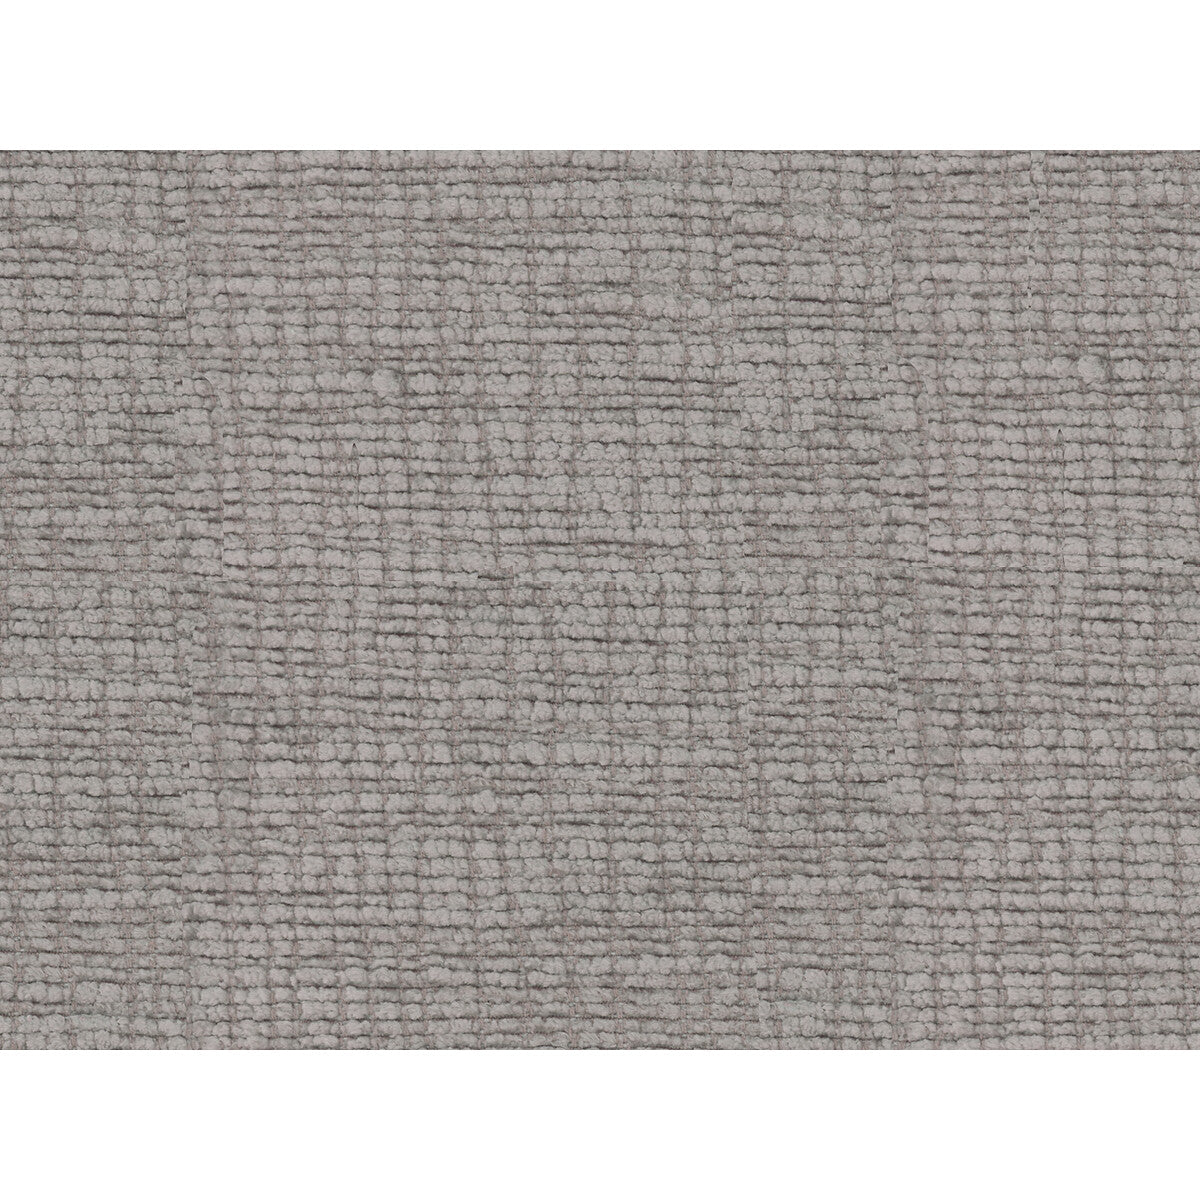 Clever Cut fabric in platinum color - pattern 34456.11.0 - by Kravet Couture